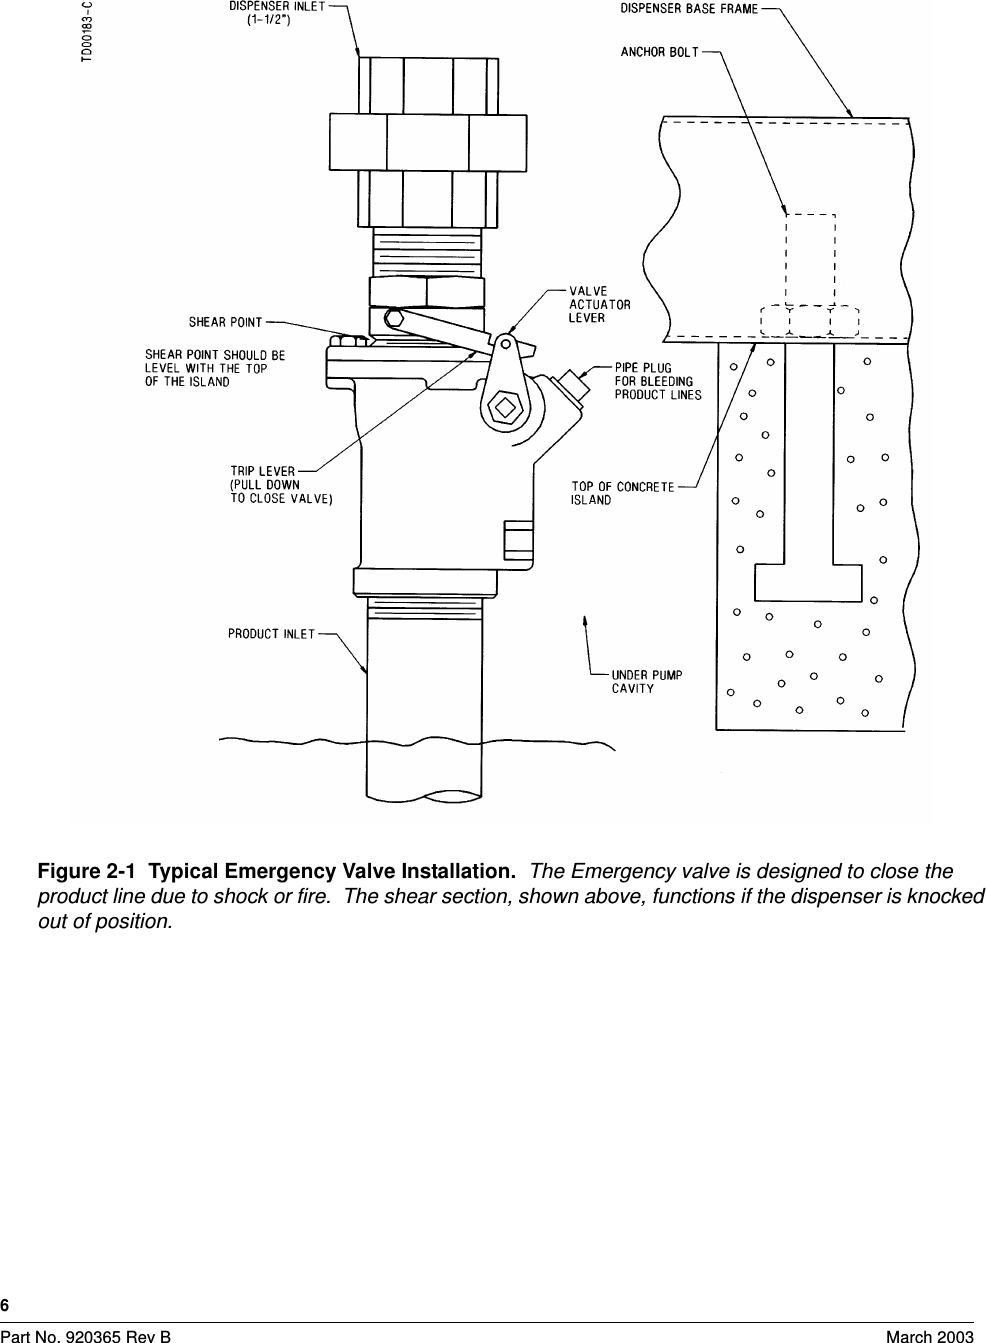 6Part No. 920365 Rev B March 2003Figure 2-1  Typical Emergency Valve Installation.  The Emergency valve is designed to close the product line due to shock or fire.  The shear section, shown above, functions if the dispenser is knocked out of position.